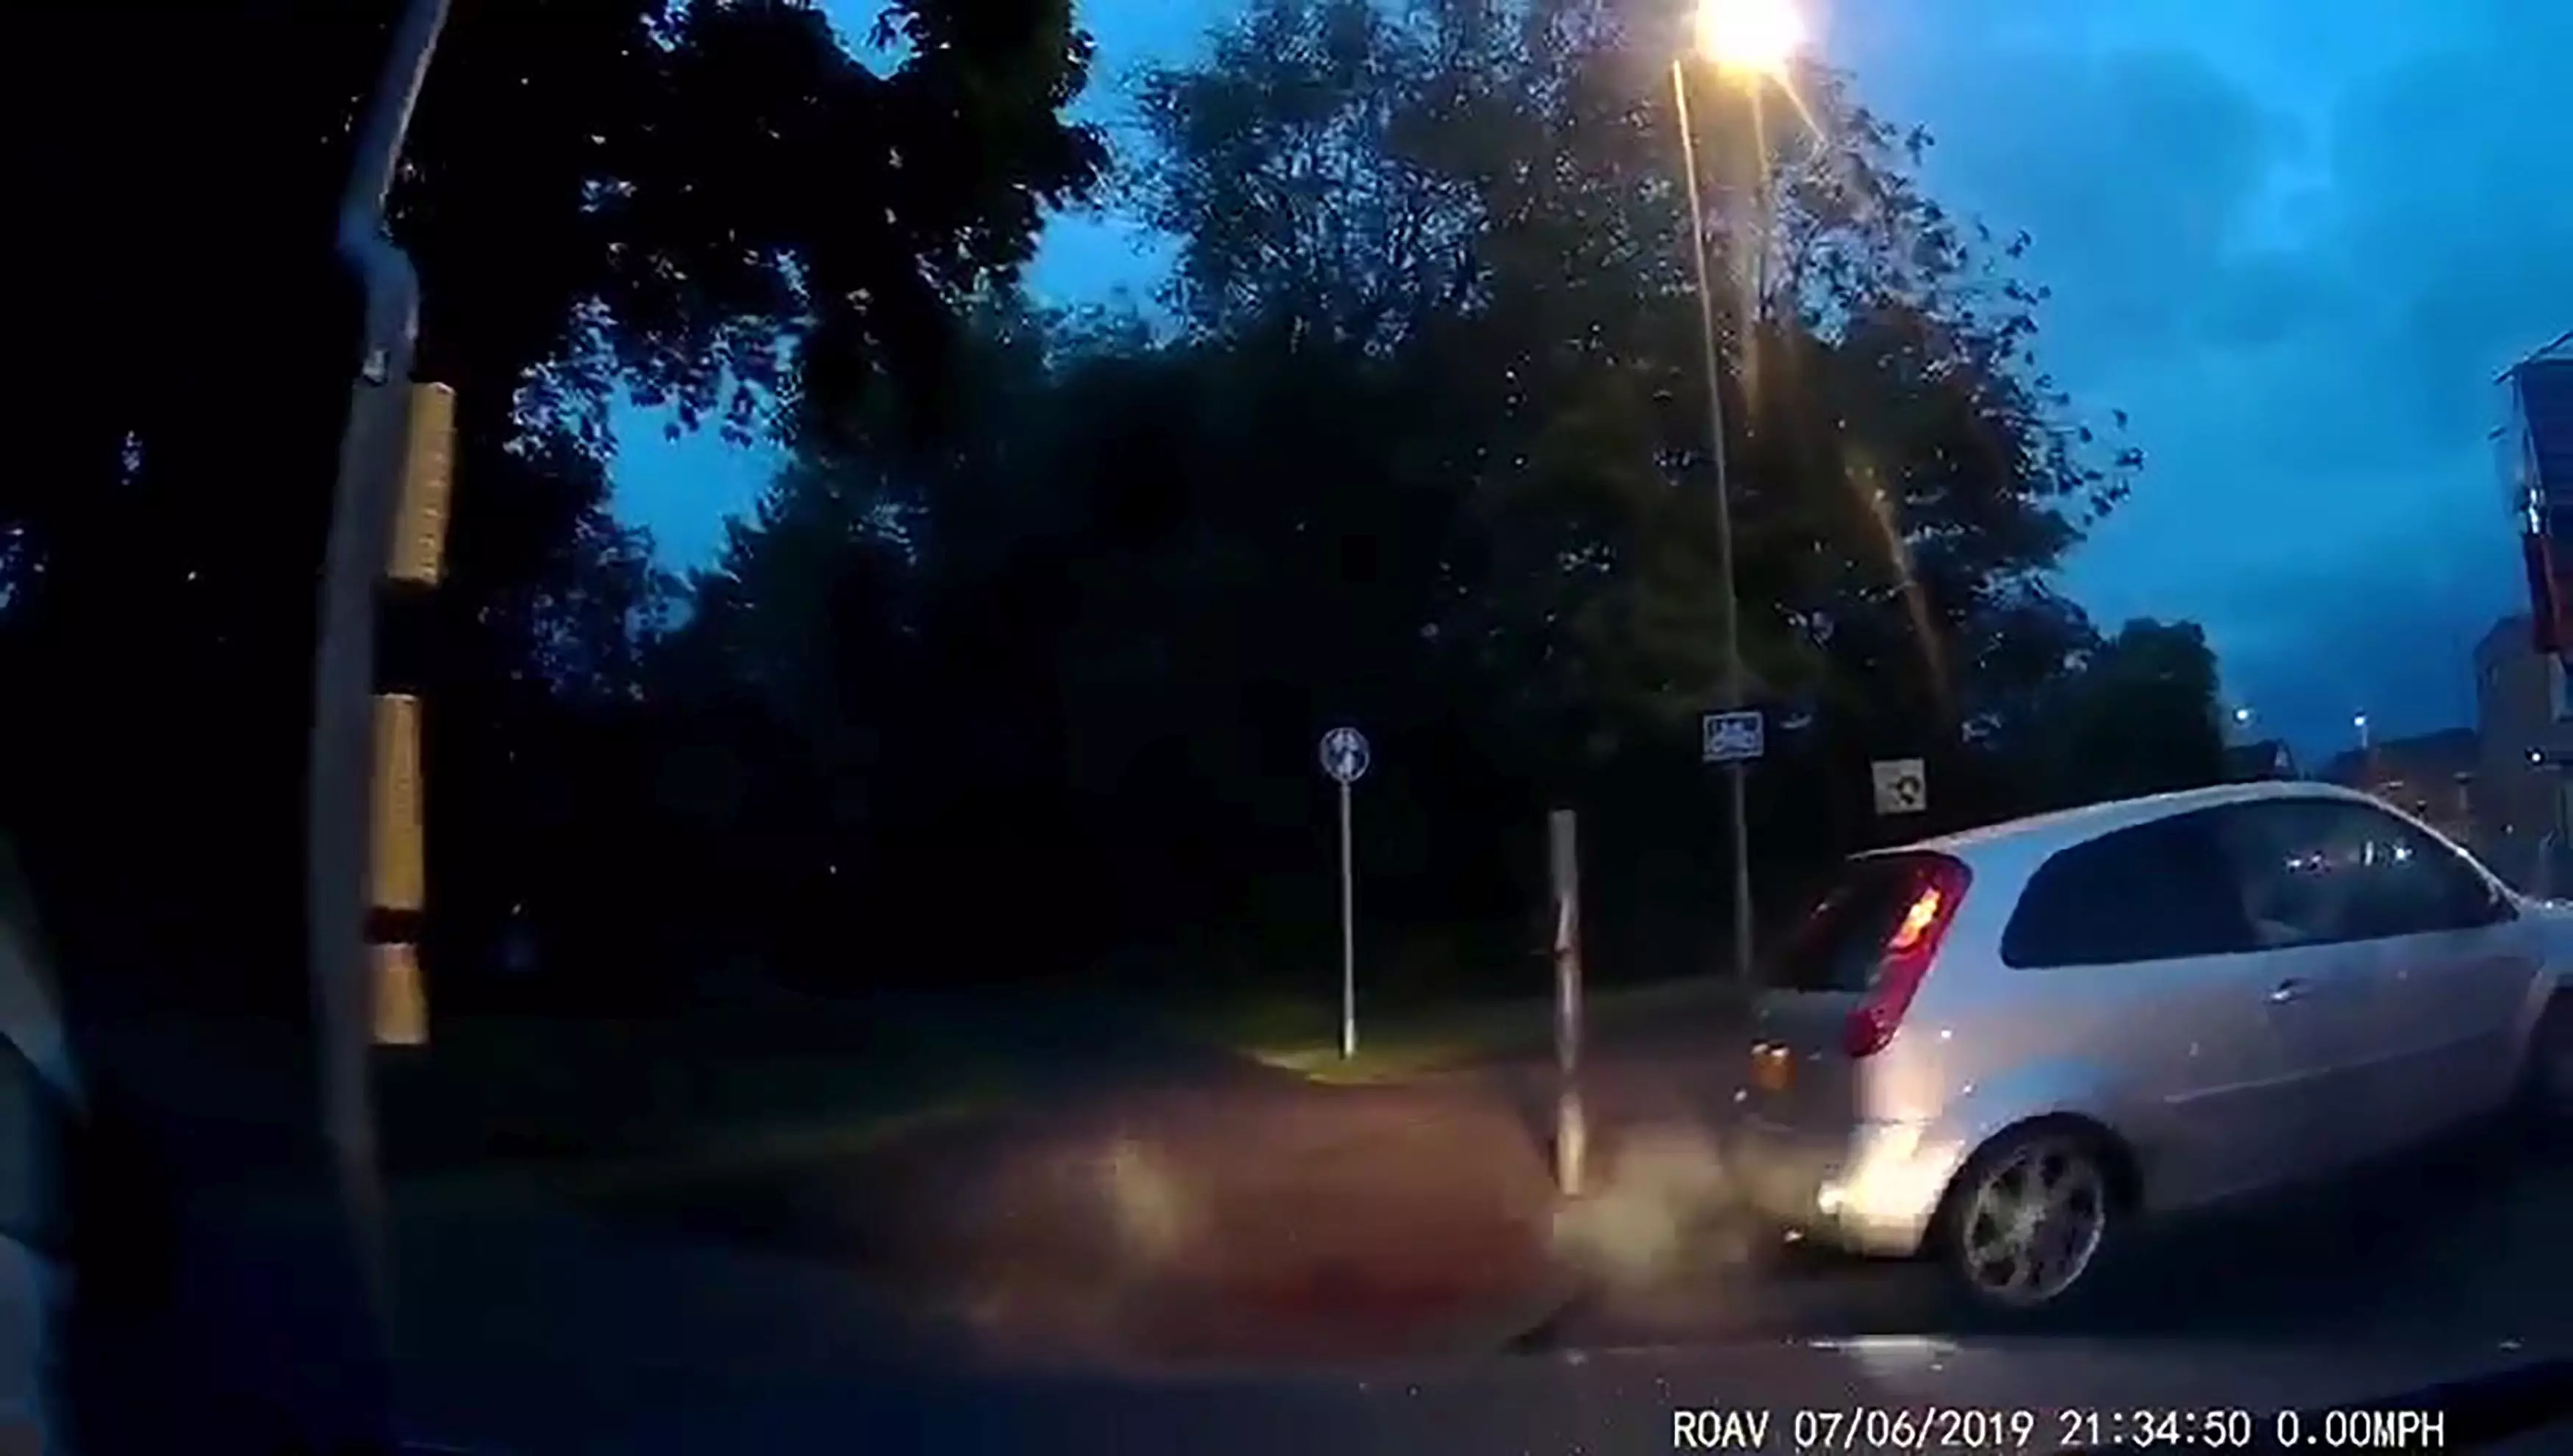 The car clips the kerb and crashes into a post.